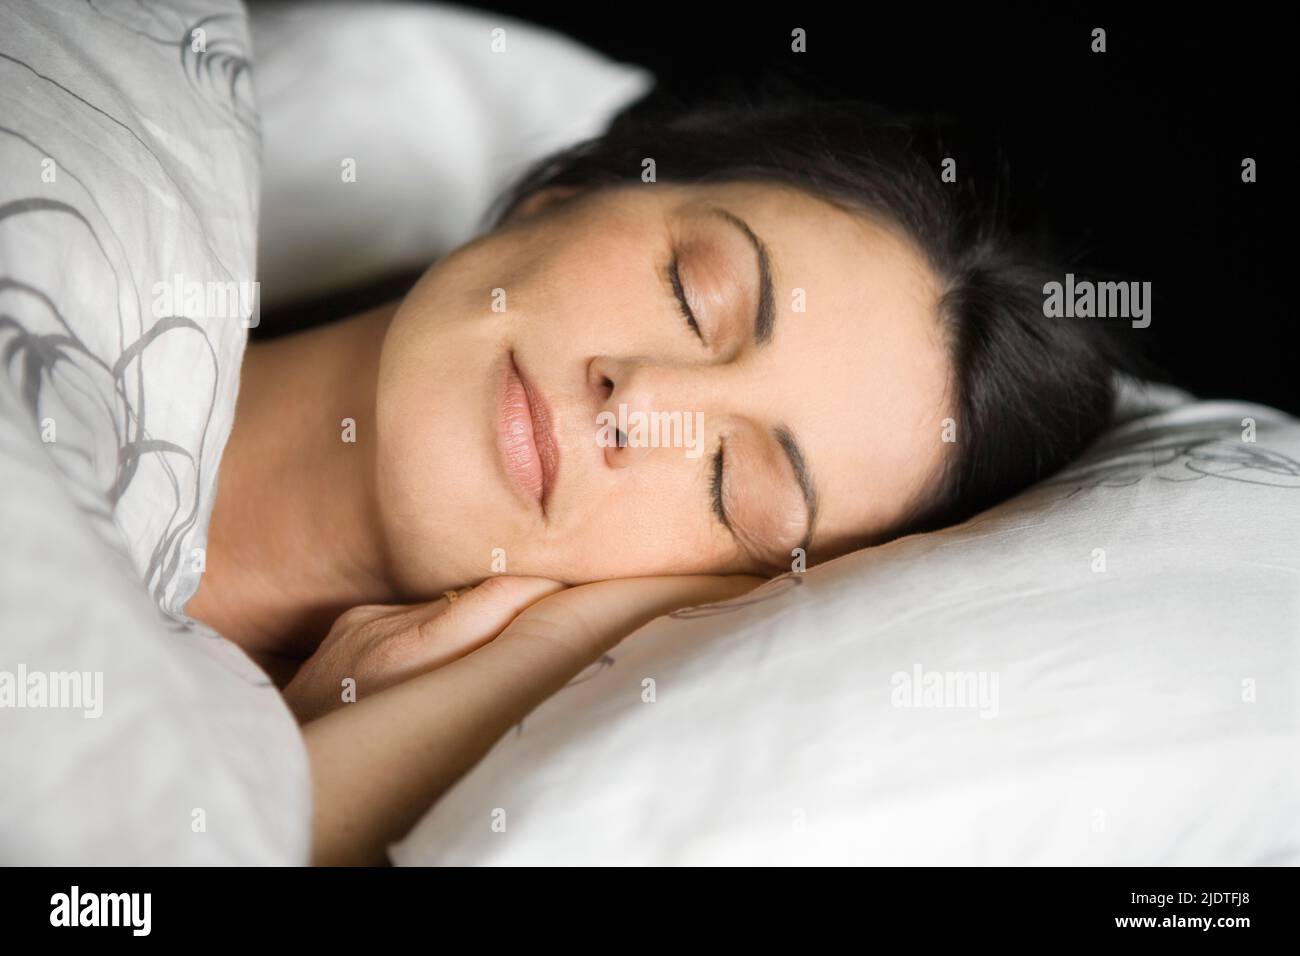 Woman sleeping in bed Banque D'Images